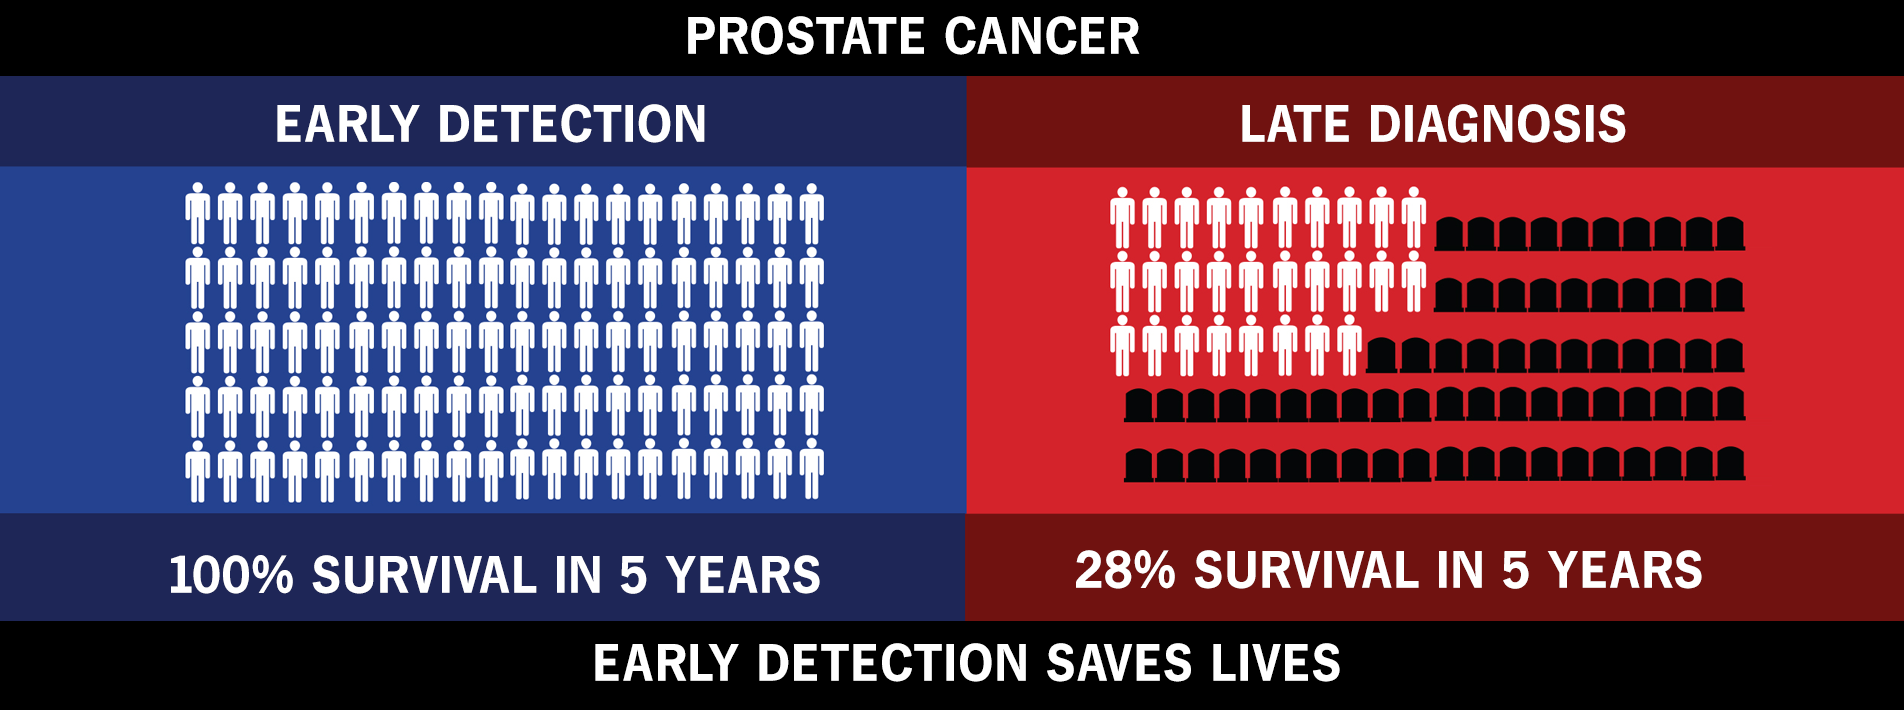 How To Detect Prostate Cancer Early